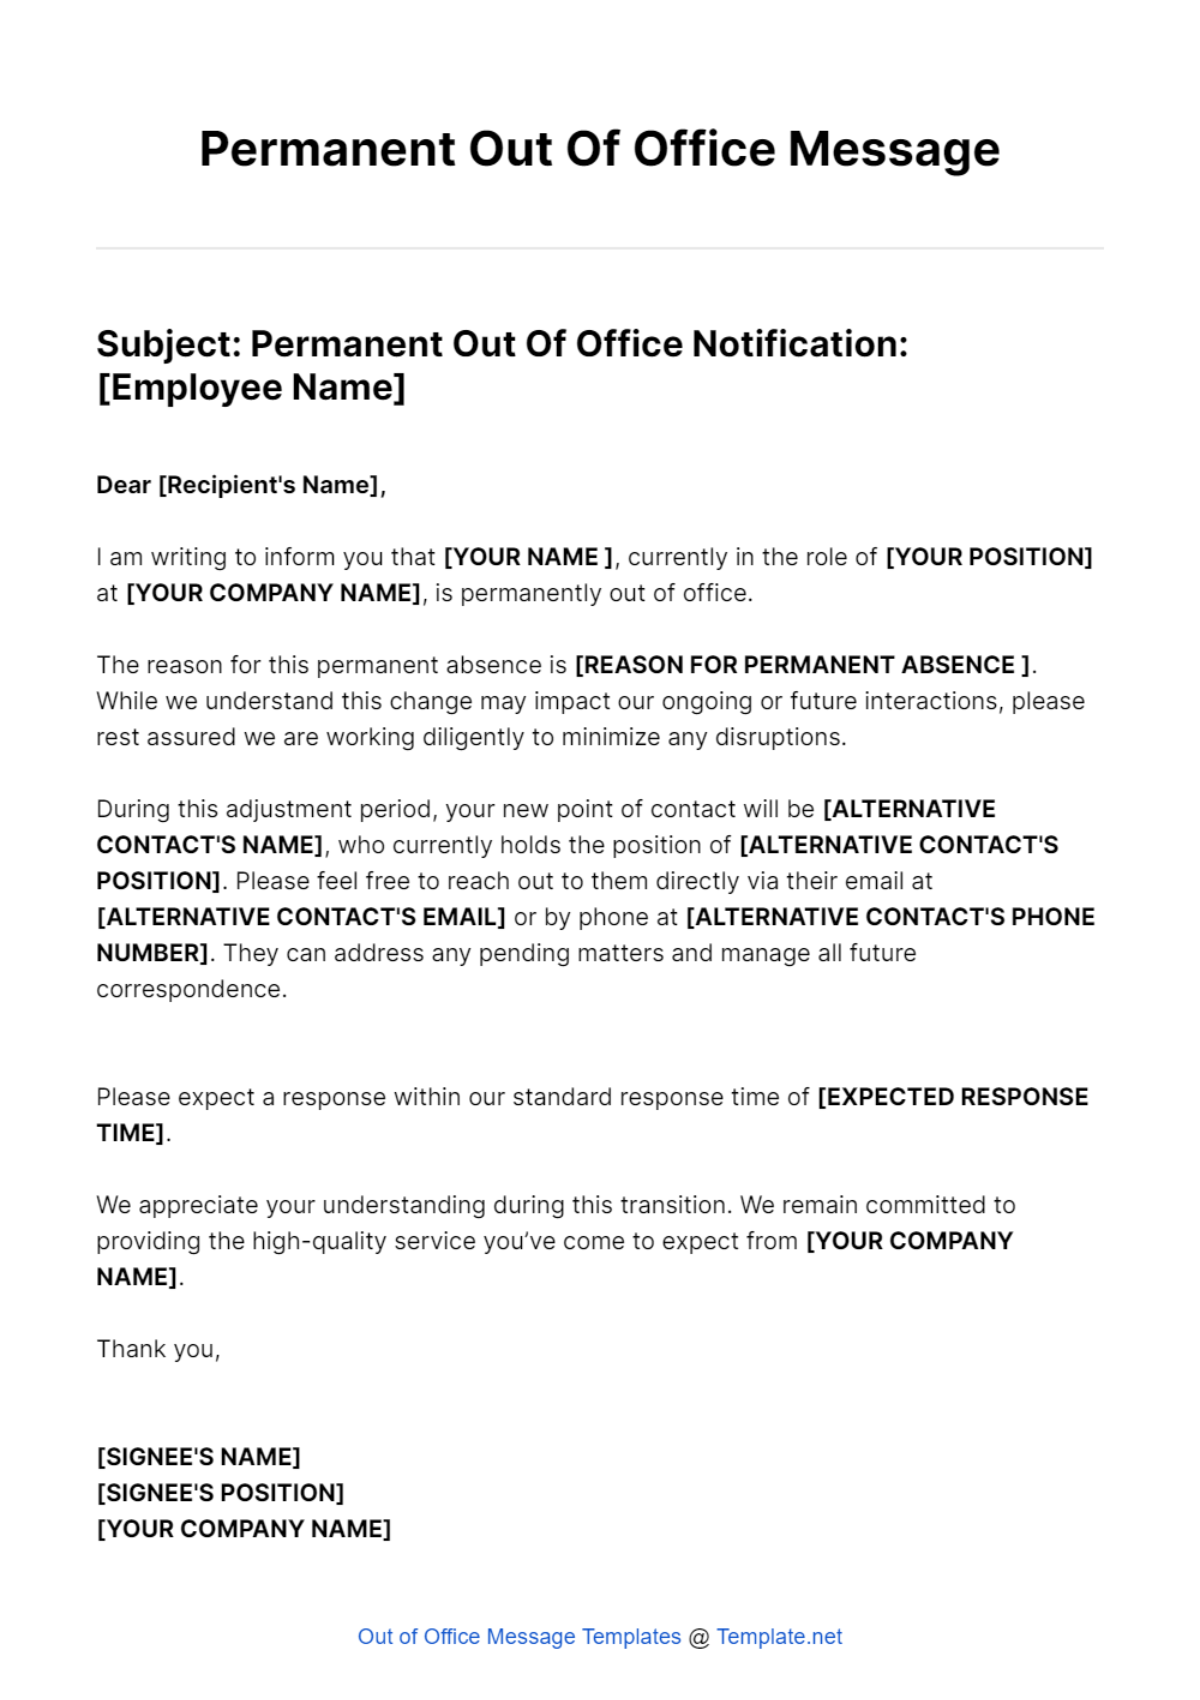 Permanent Out Of Office Message Template